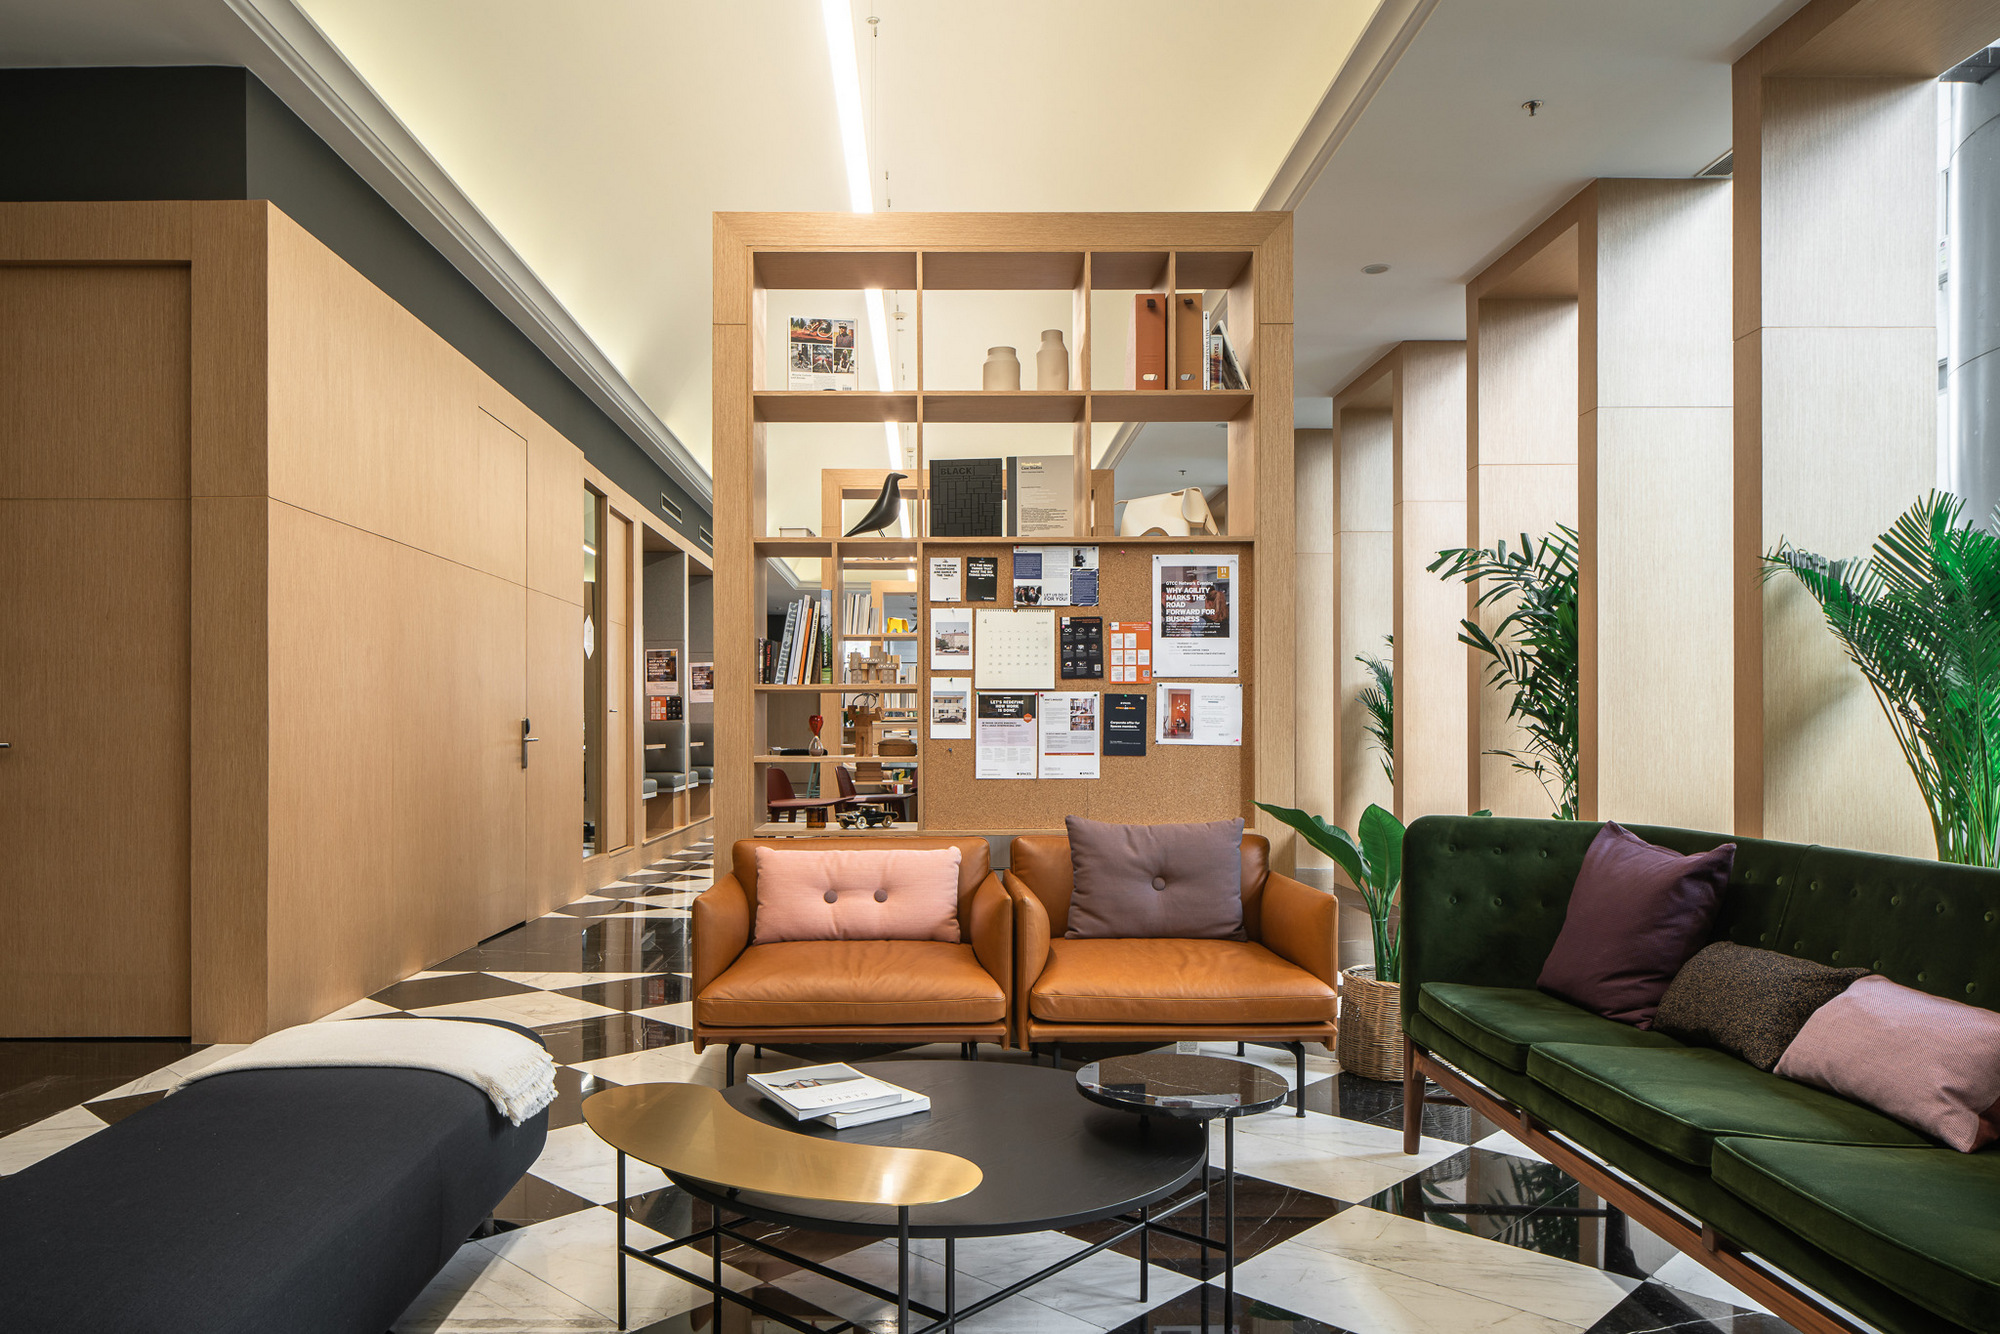 SPACES Empire Tower Offices - Bangkok | Office Snapshots